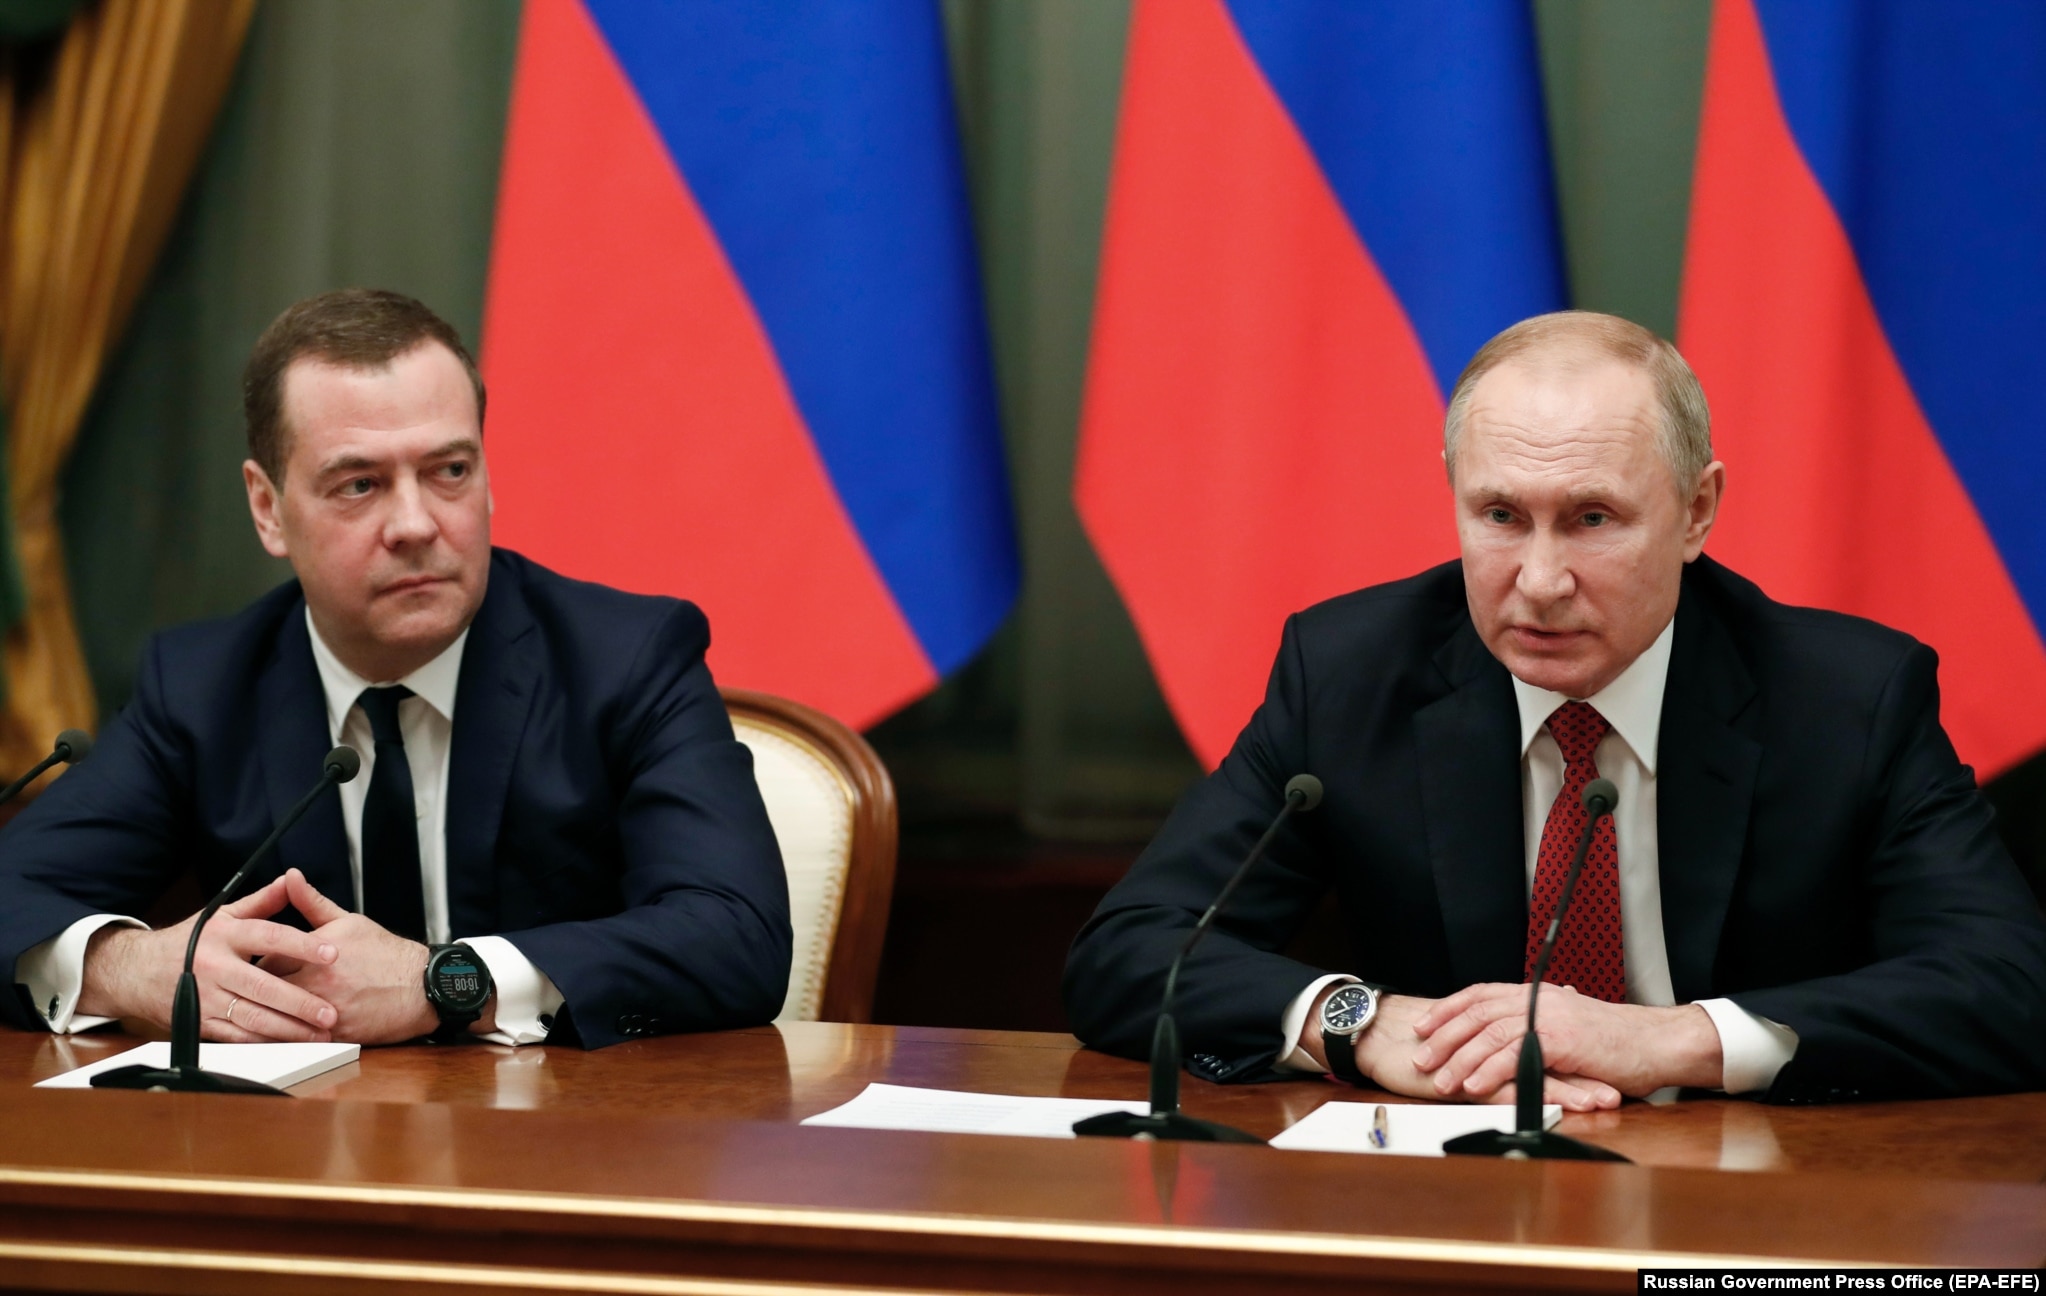 Putin and Medvedev meet with members of the government in Moscow on January 15, 2020. Putin used his annual state-of-the-nation speech to call for a referendum on substantial constitutional amendments that would strengthen parliament's powers before his term ends in 2024. Hours later, Medvedev and his cabinet resigned.